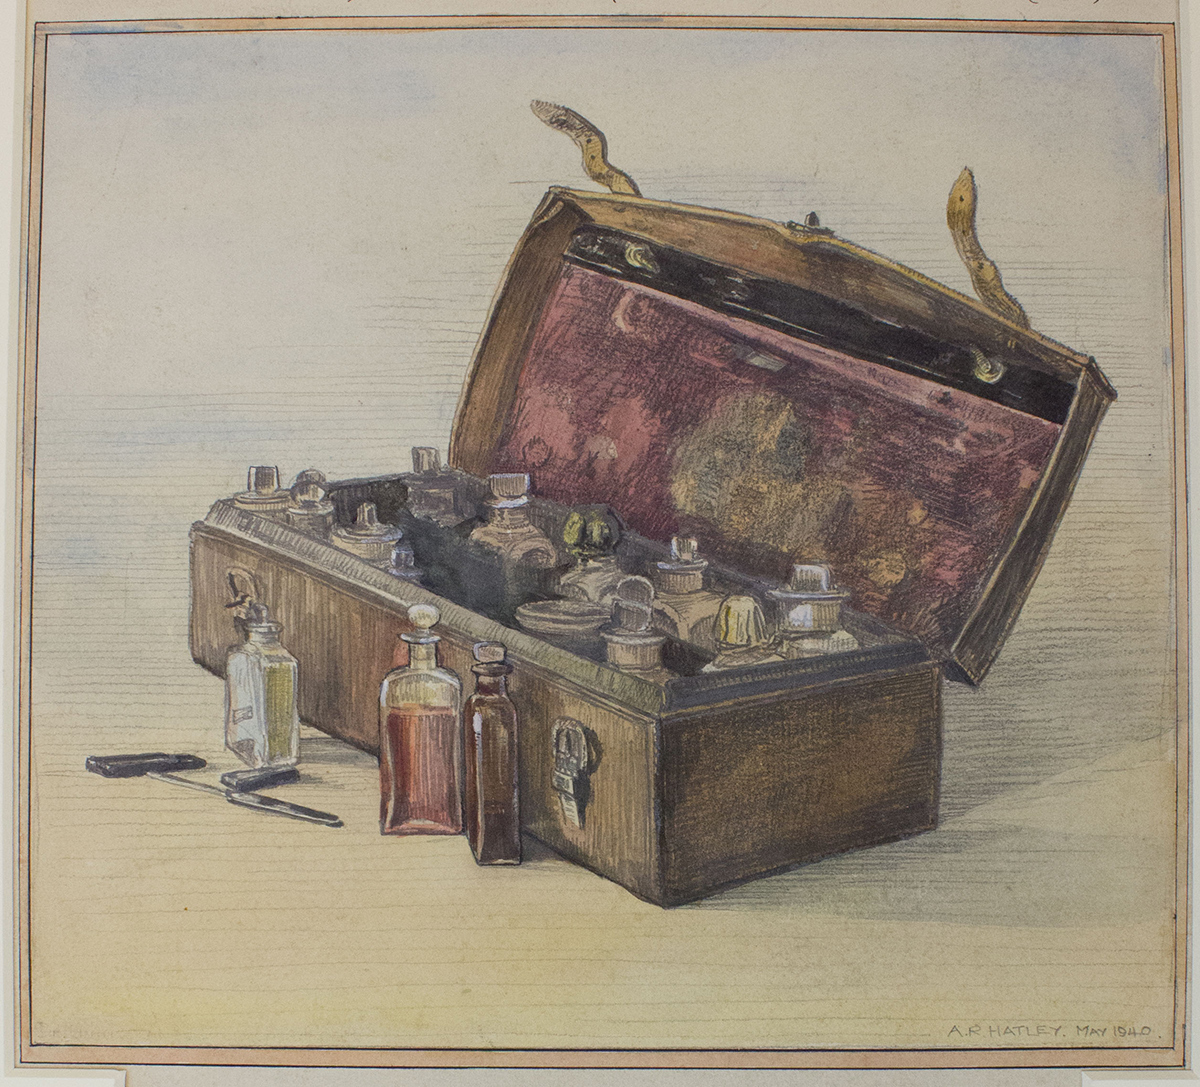 Watercolour painting of Dr Livingstone's medical chest. Used by him on his Last Journey, c.1940. Image of item from SOAS Library, University of London by Angela Aliff. Image copyright Council for World Mission. Used by permission for private study, educational or research purposes only. Please contact SOAS Archives & Special Collections on docenquiry@soas.ac.uk for permission to use this material for any other purpose.